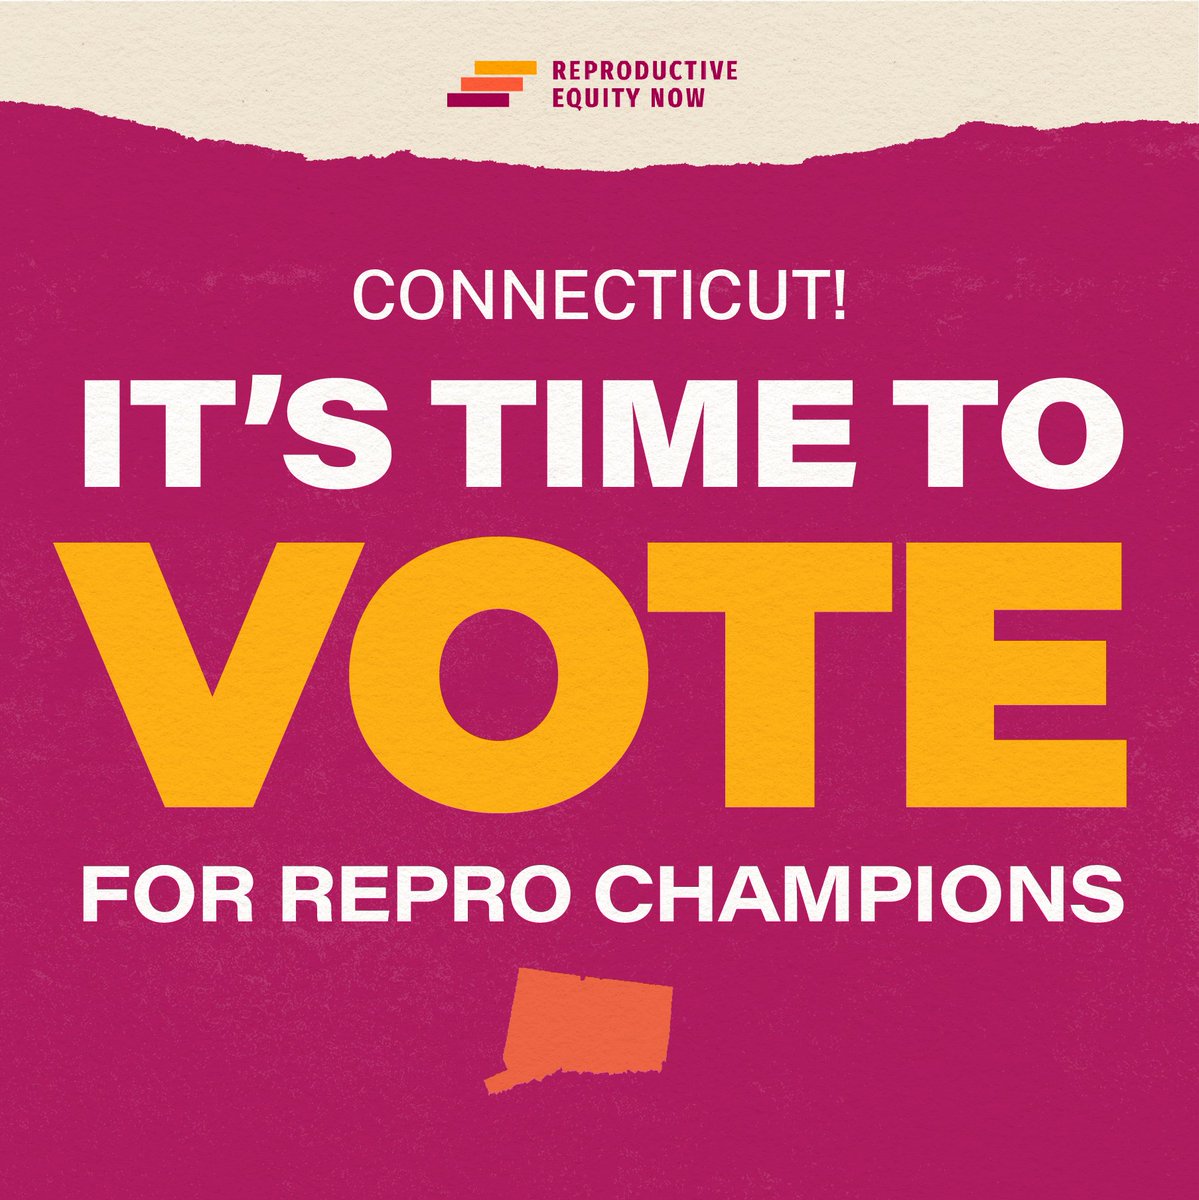 It’s time to vote, Connecticut! Polls are open today from 6 a.m. to 8 p.m. Check your registration and find your polling place at portaldir.ct.gov/sots/LookUp.as…. Make sure to cast your vote for repro champions this primary season! #ctpolitics